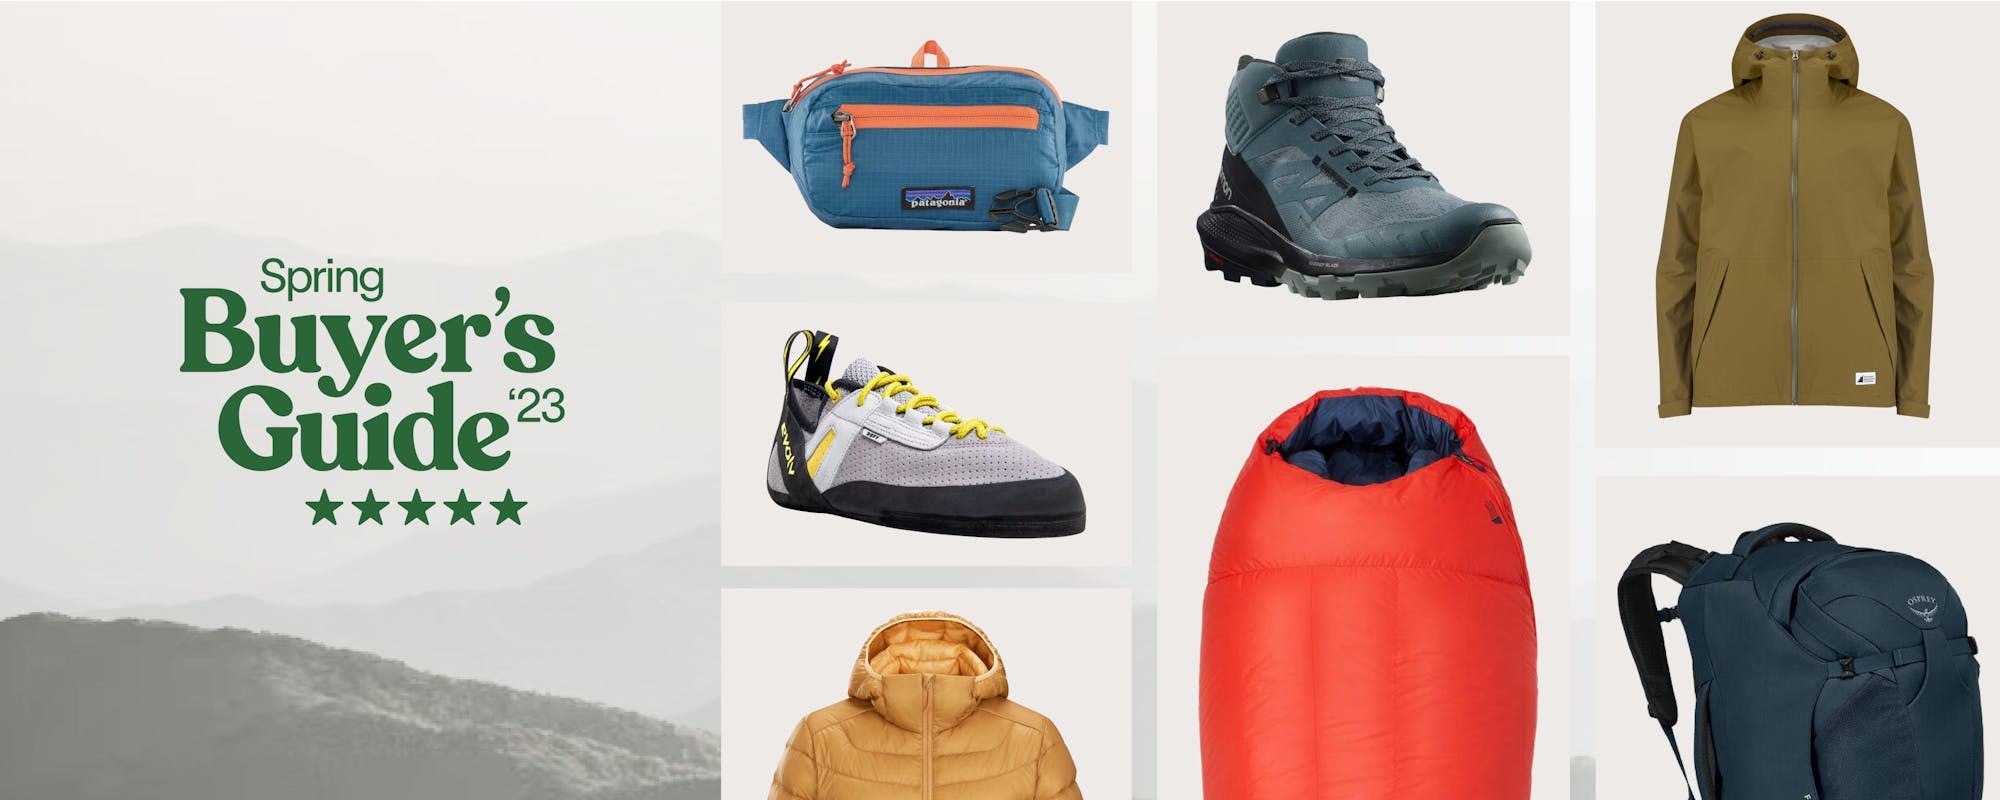 MEC Buyer’s Guide: Spring ‘23. This is it: your shortcut to the best gear for hiking, climbing, trail running, camping and so much more. Explore the guide